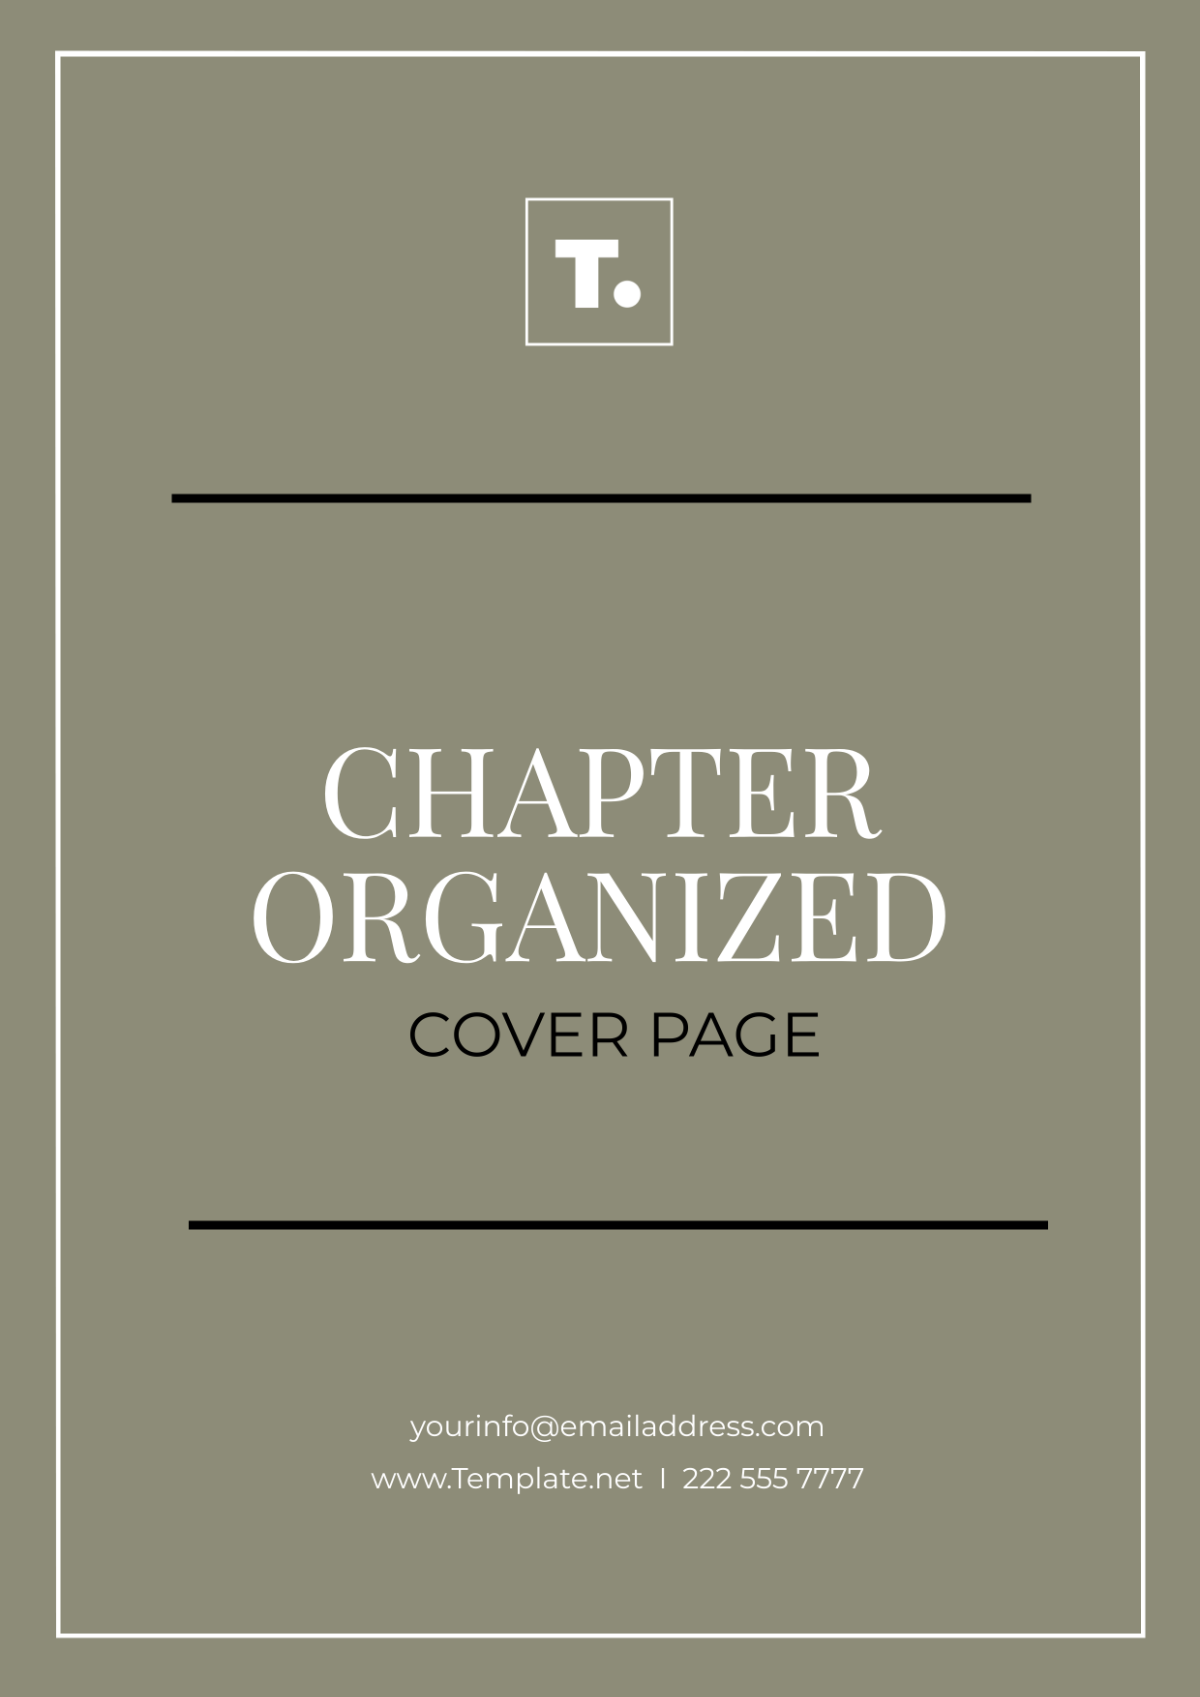 Chapter Organized Cover Page